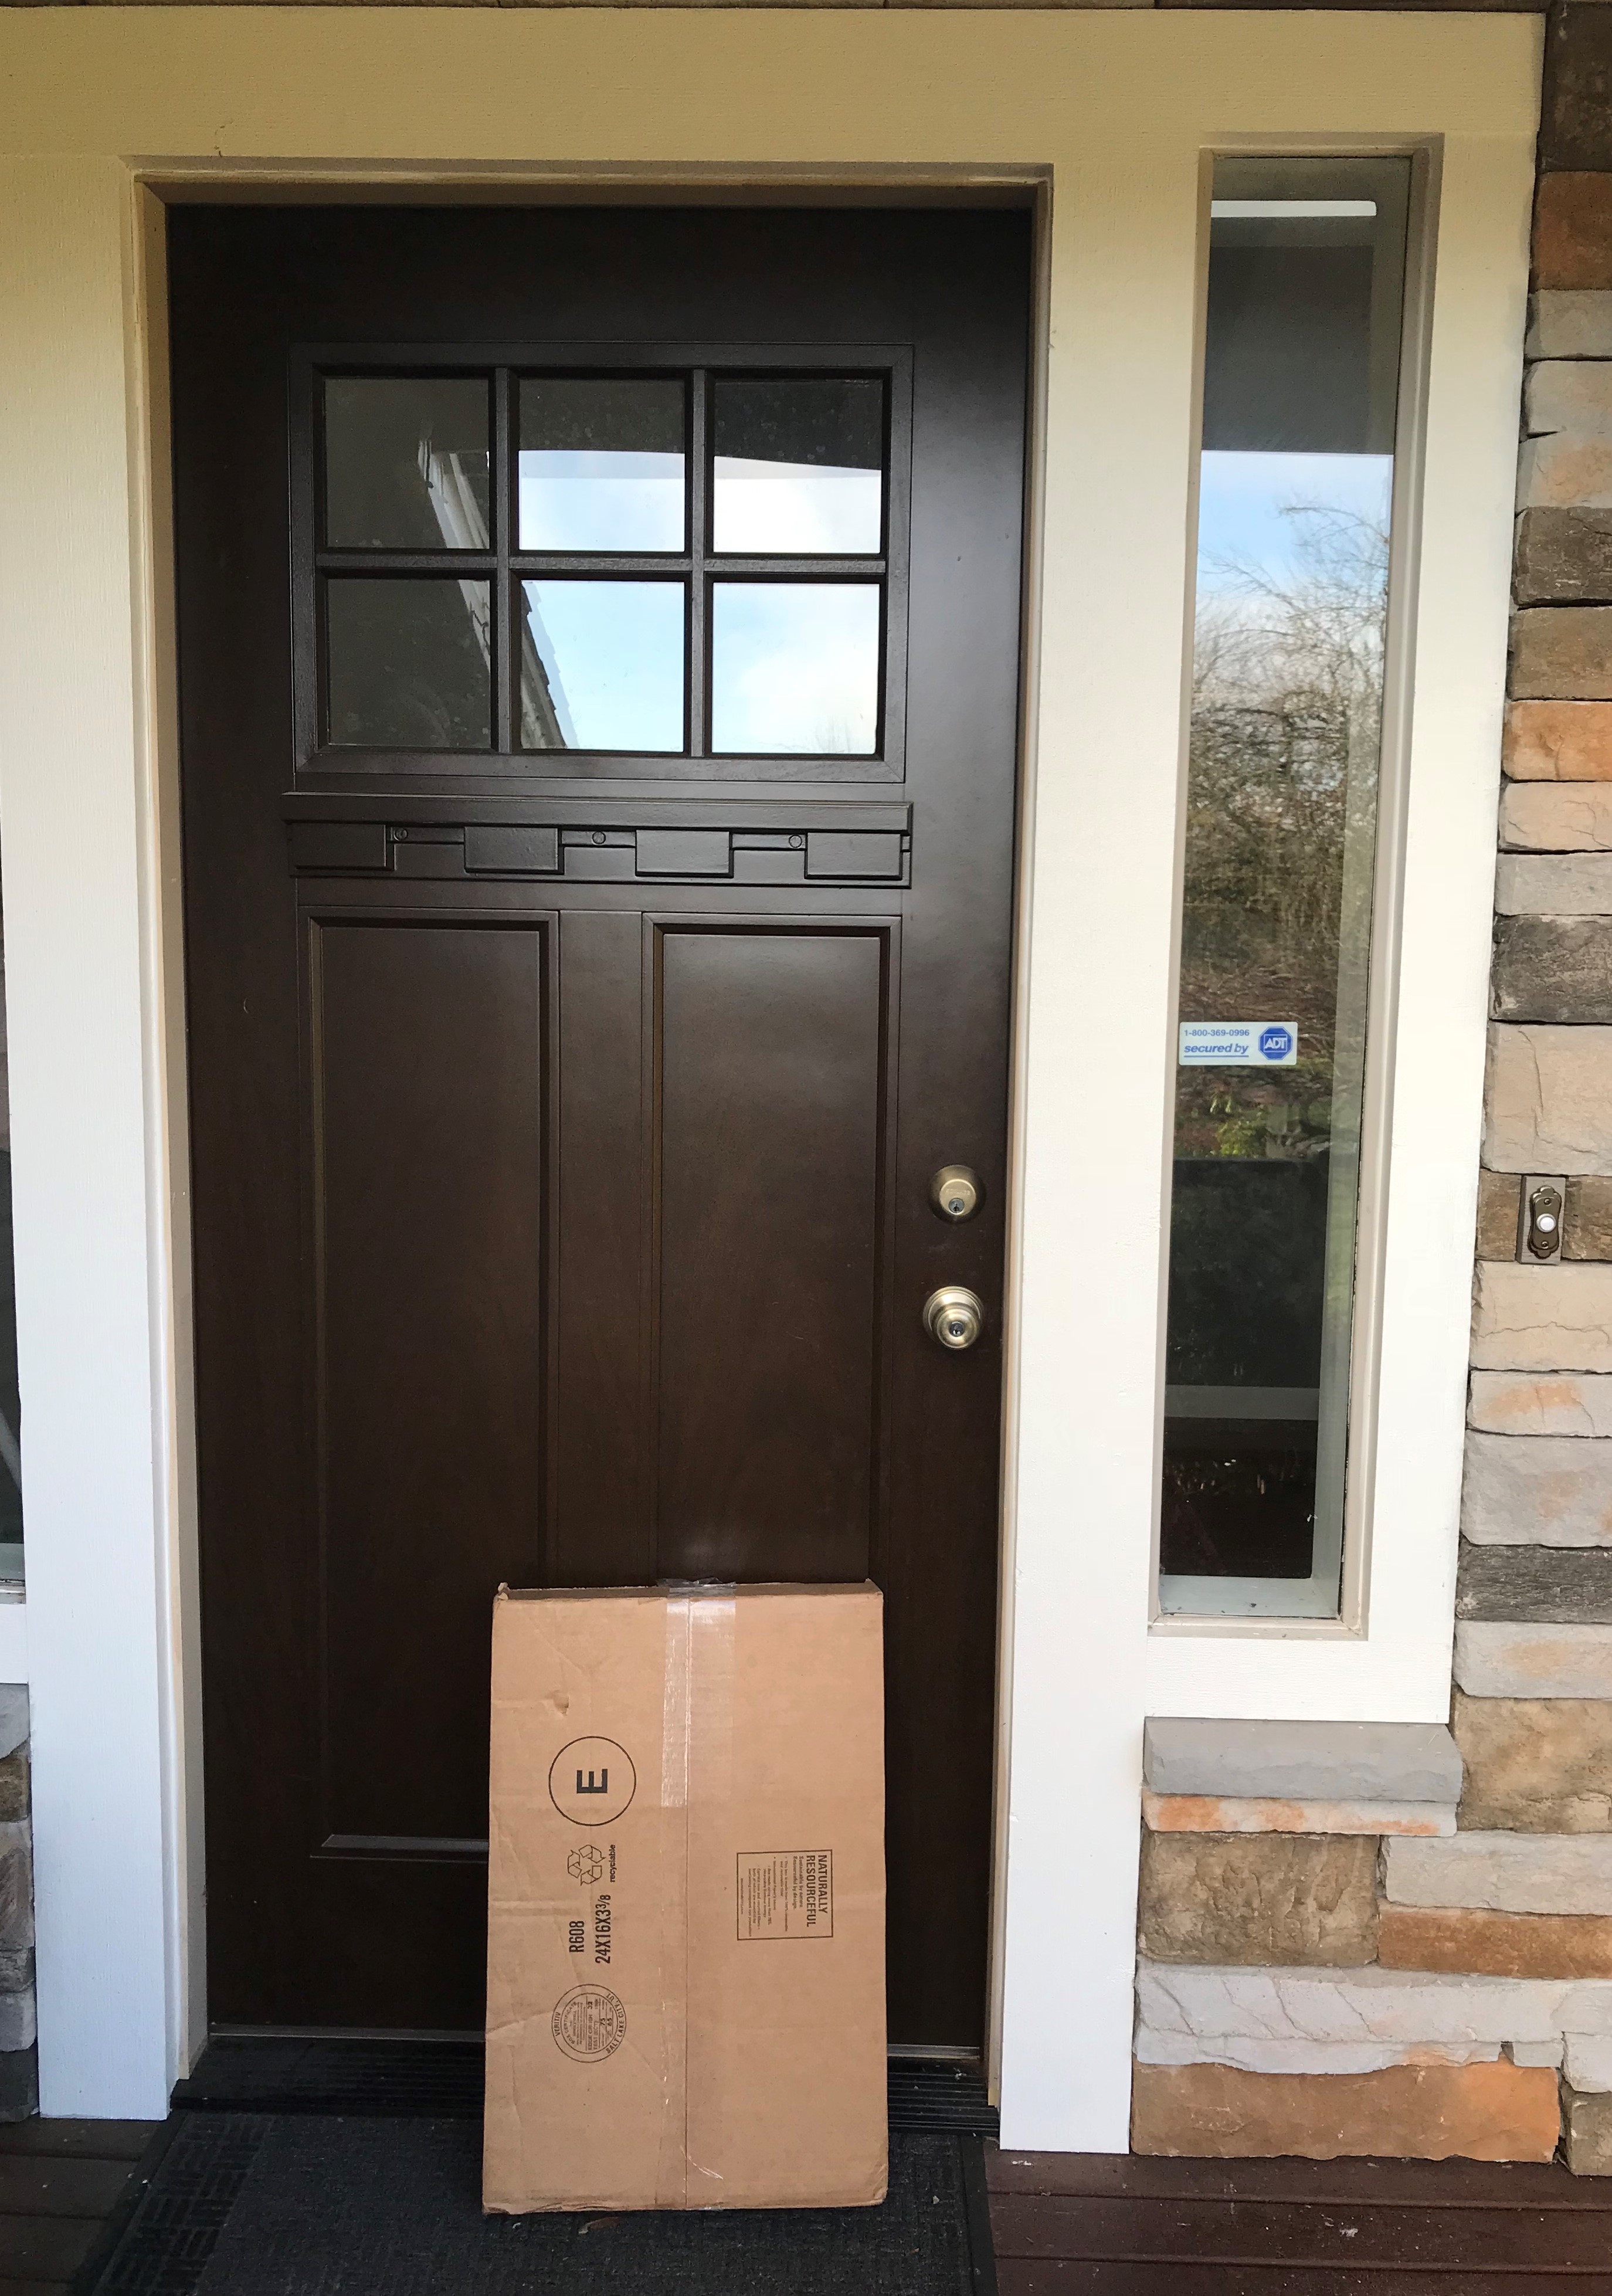 How to avoid holiday package theft in Seattle, WA